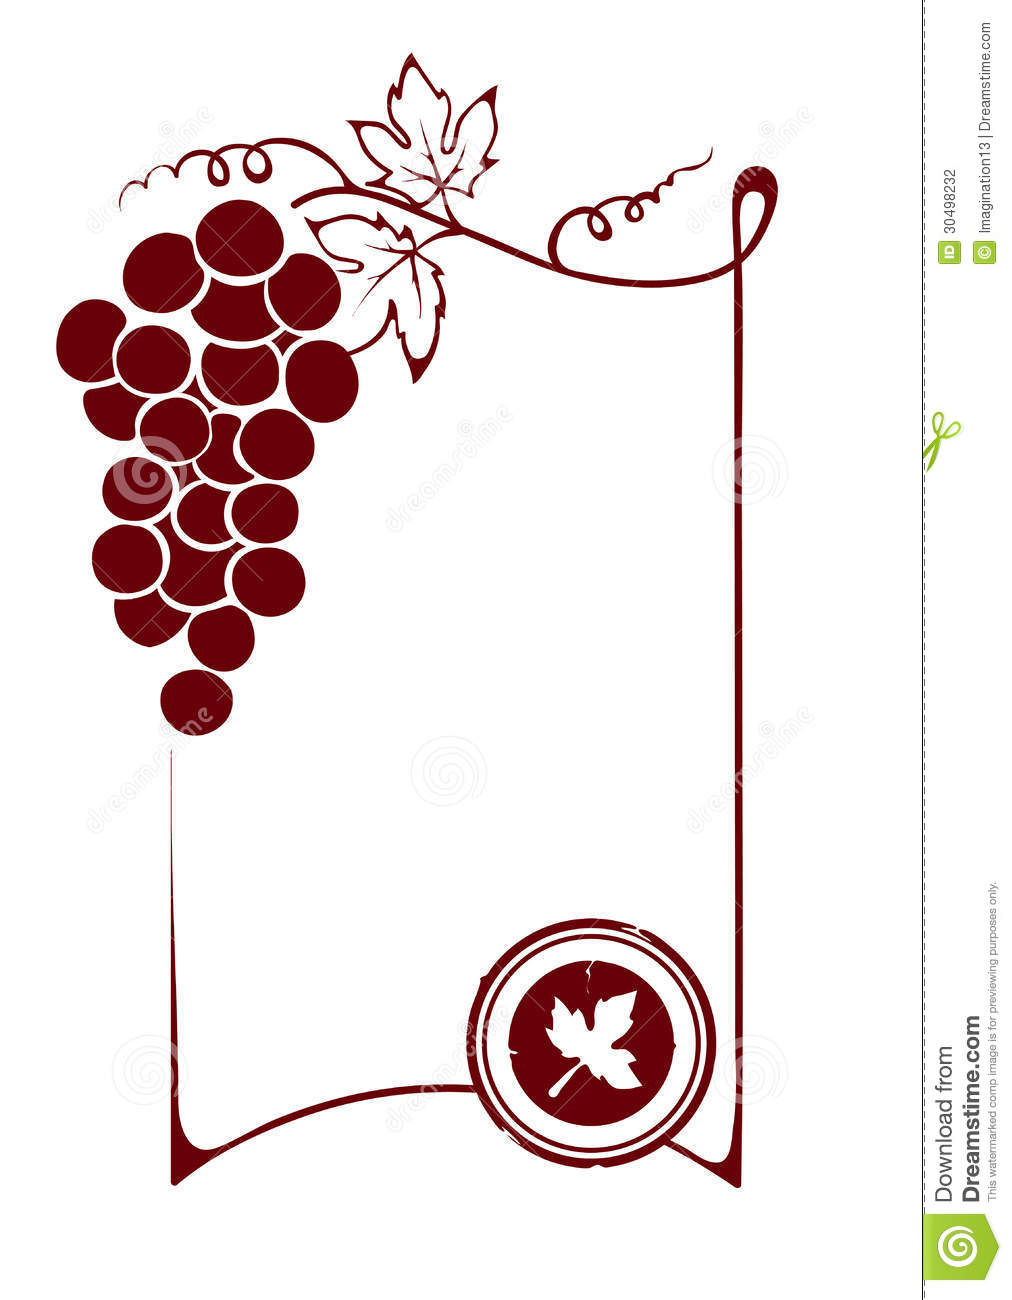 The blank wine label stock vector. Illustration of ornament - 10